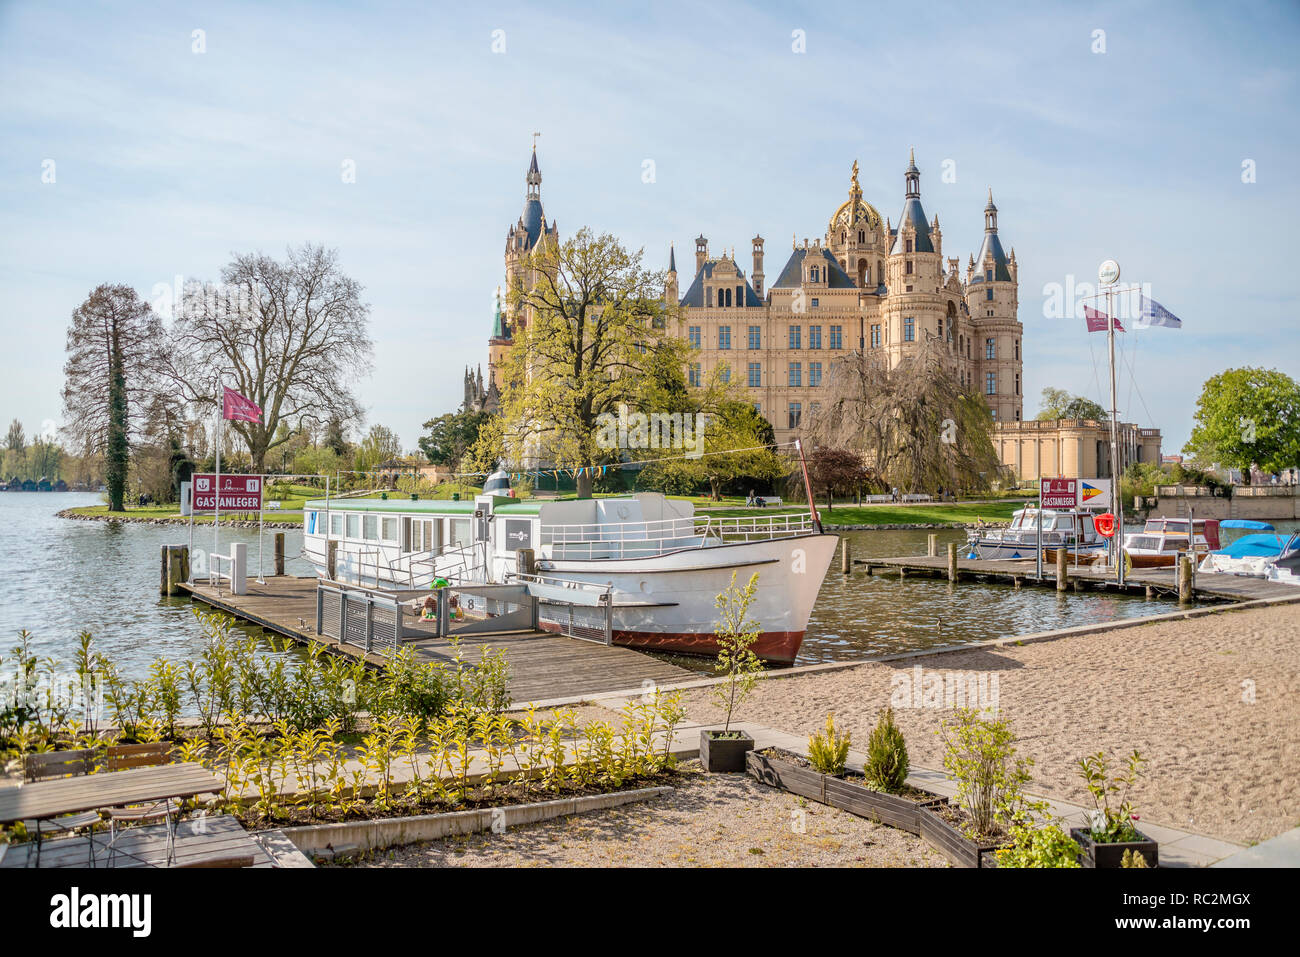 Sightseeing ship in front of Schwerin Palace, Schwerin, Mecklenburg Western Pomerania, Germany Stock Photo